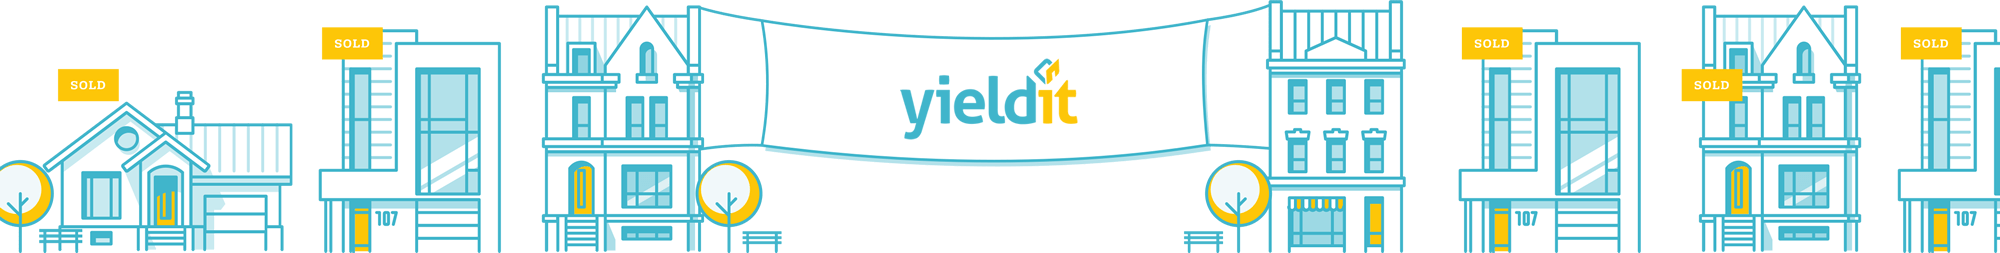 yieldit - The smartest way to buy and sell your buy to let property